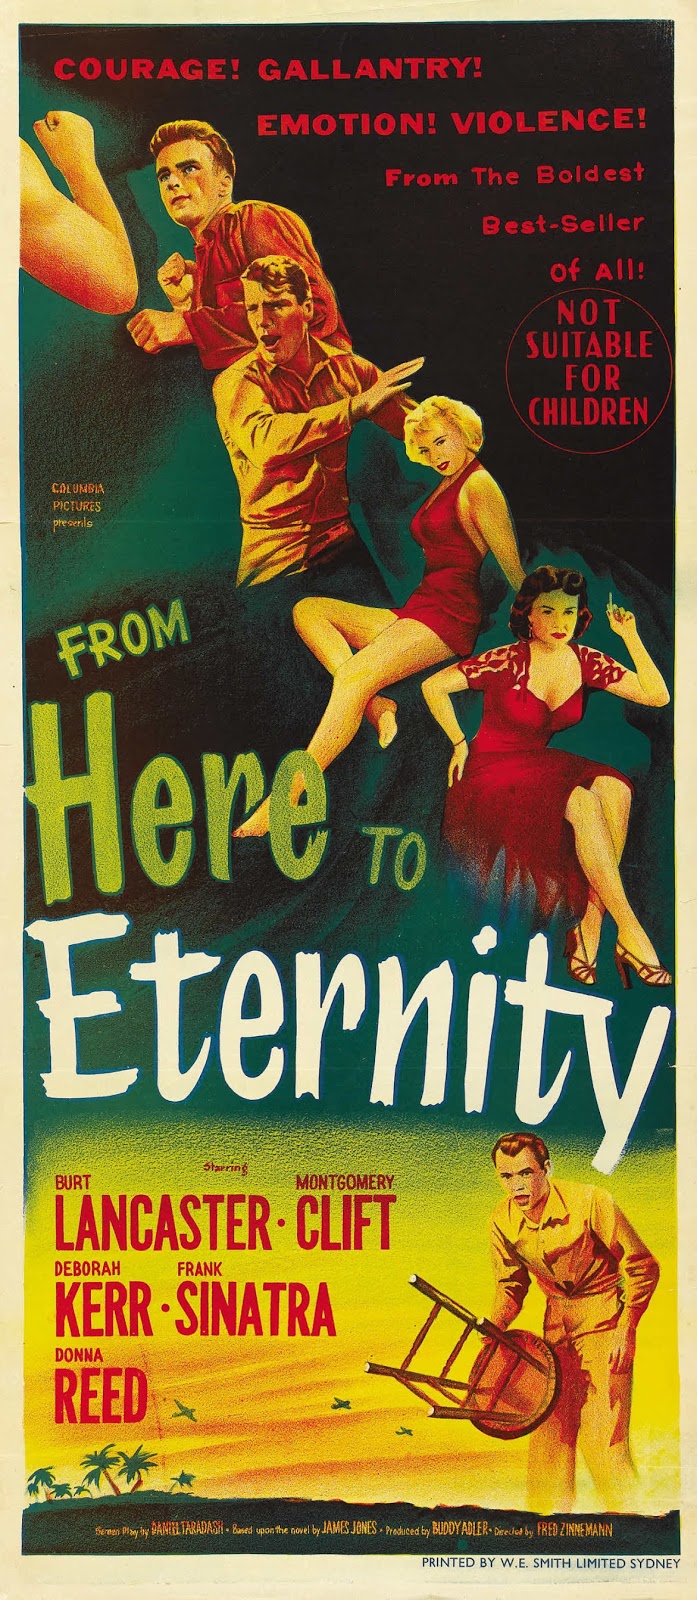 The Signal Watch: Movie Watch: From Here to Eternity (1953)